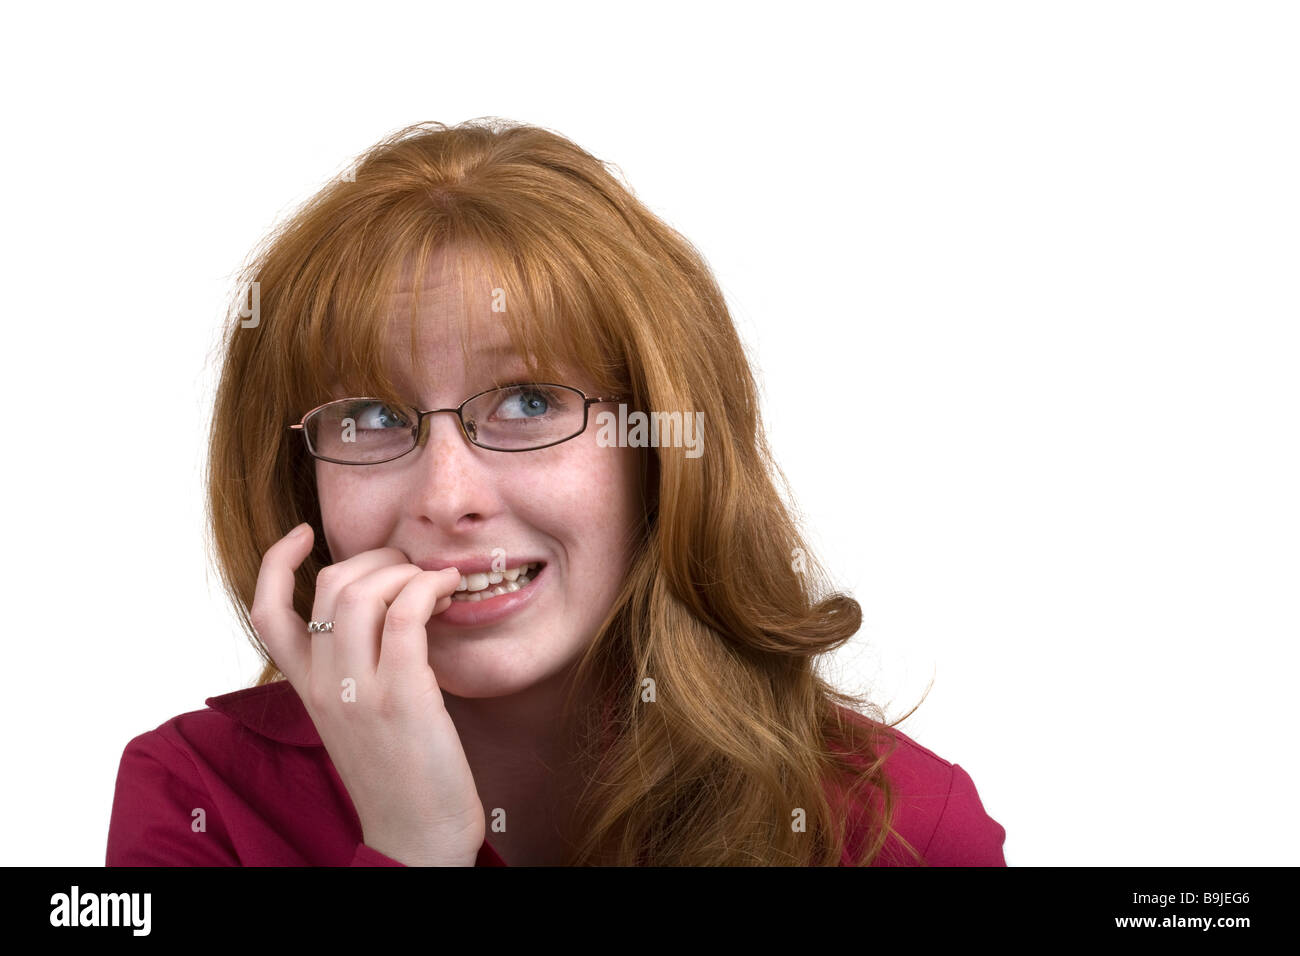 Office Assistant Biting Her Nails Stock Photo